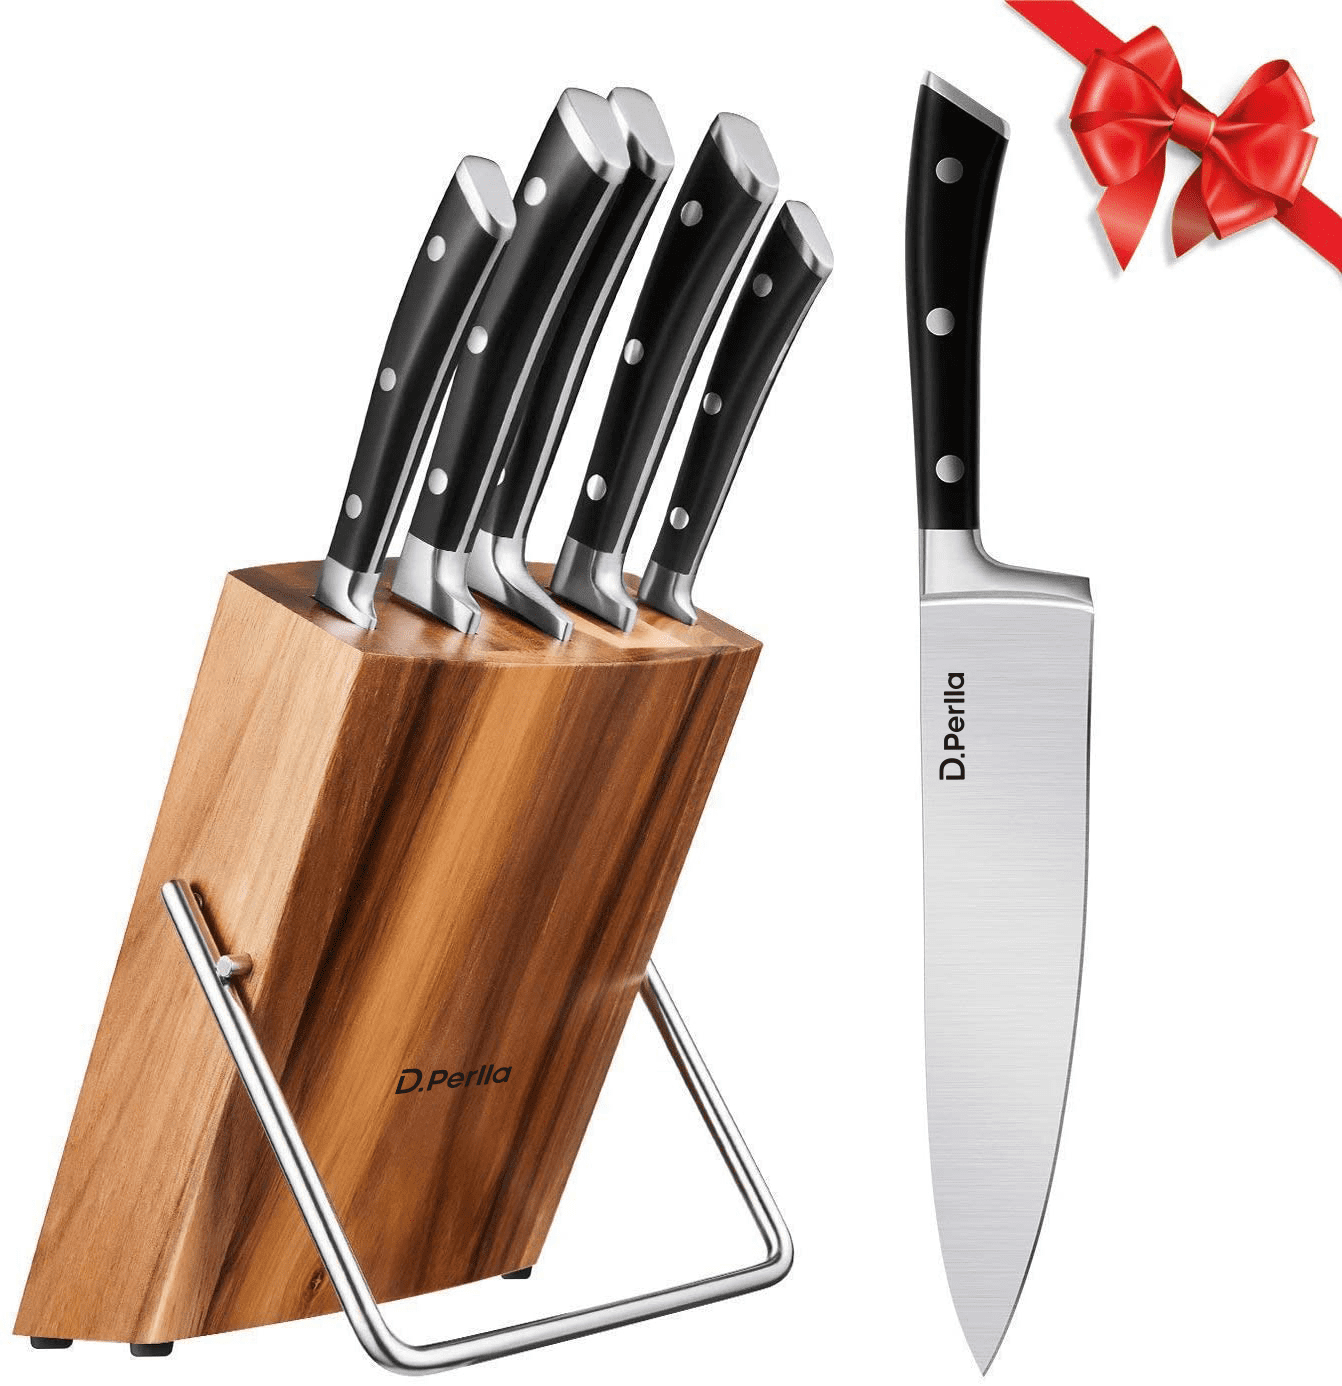 Cheer Collection 6 Piece Stainless Steel Chef Knife Set with Acrylic Stand